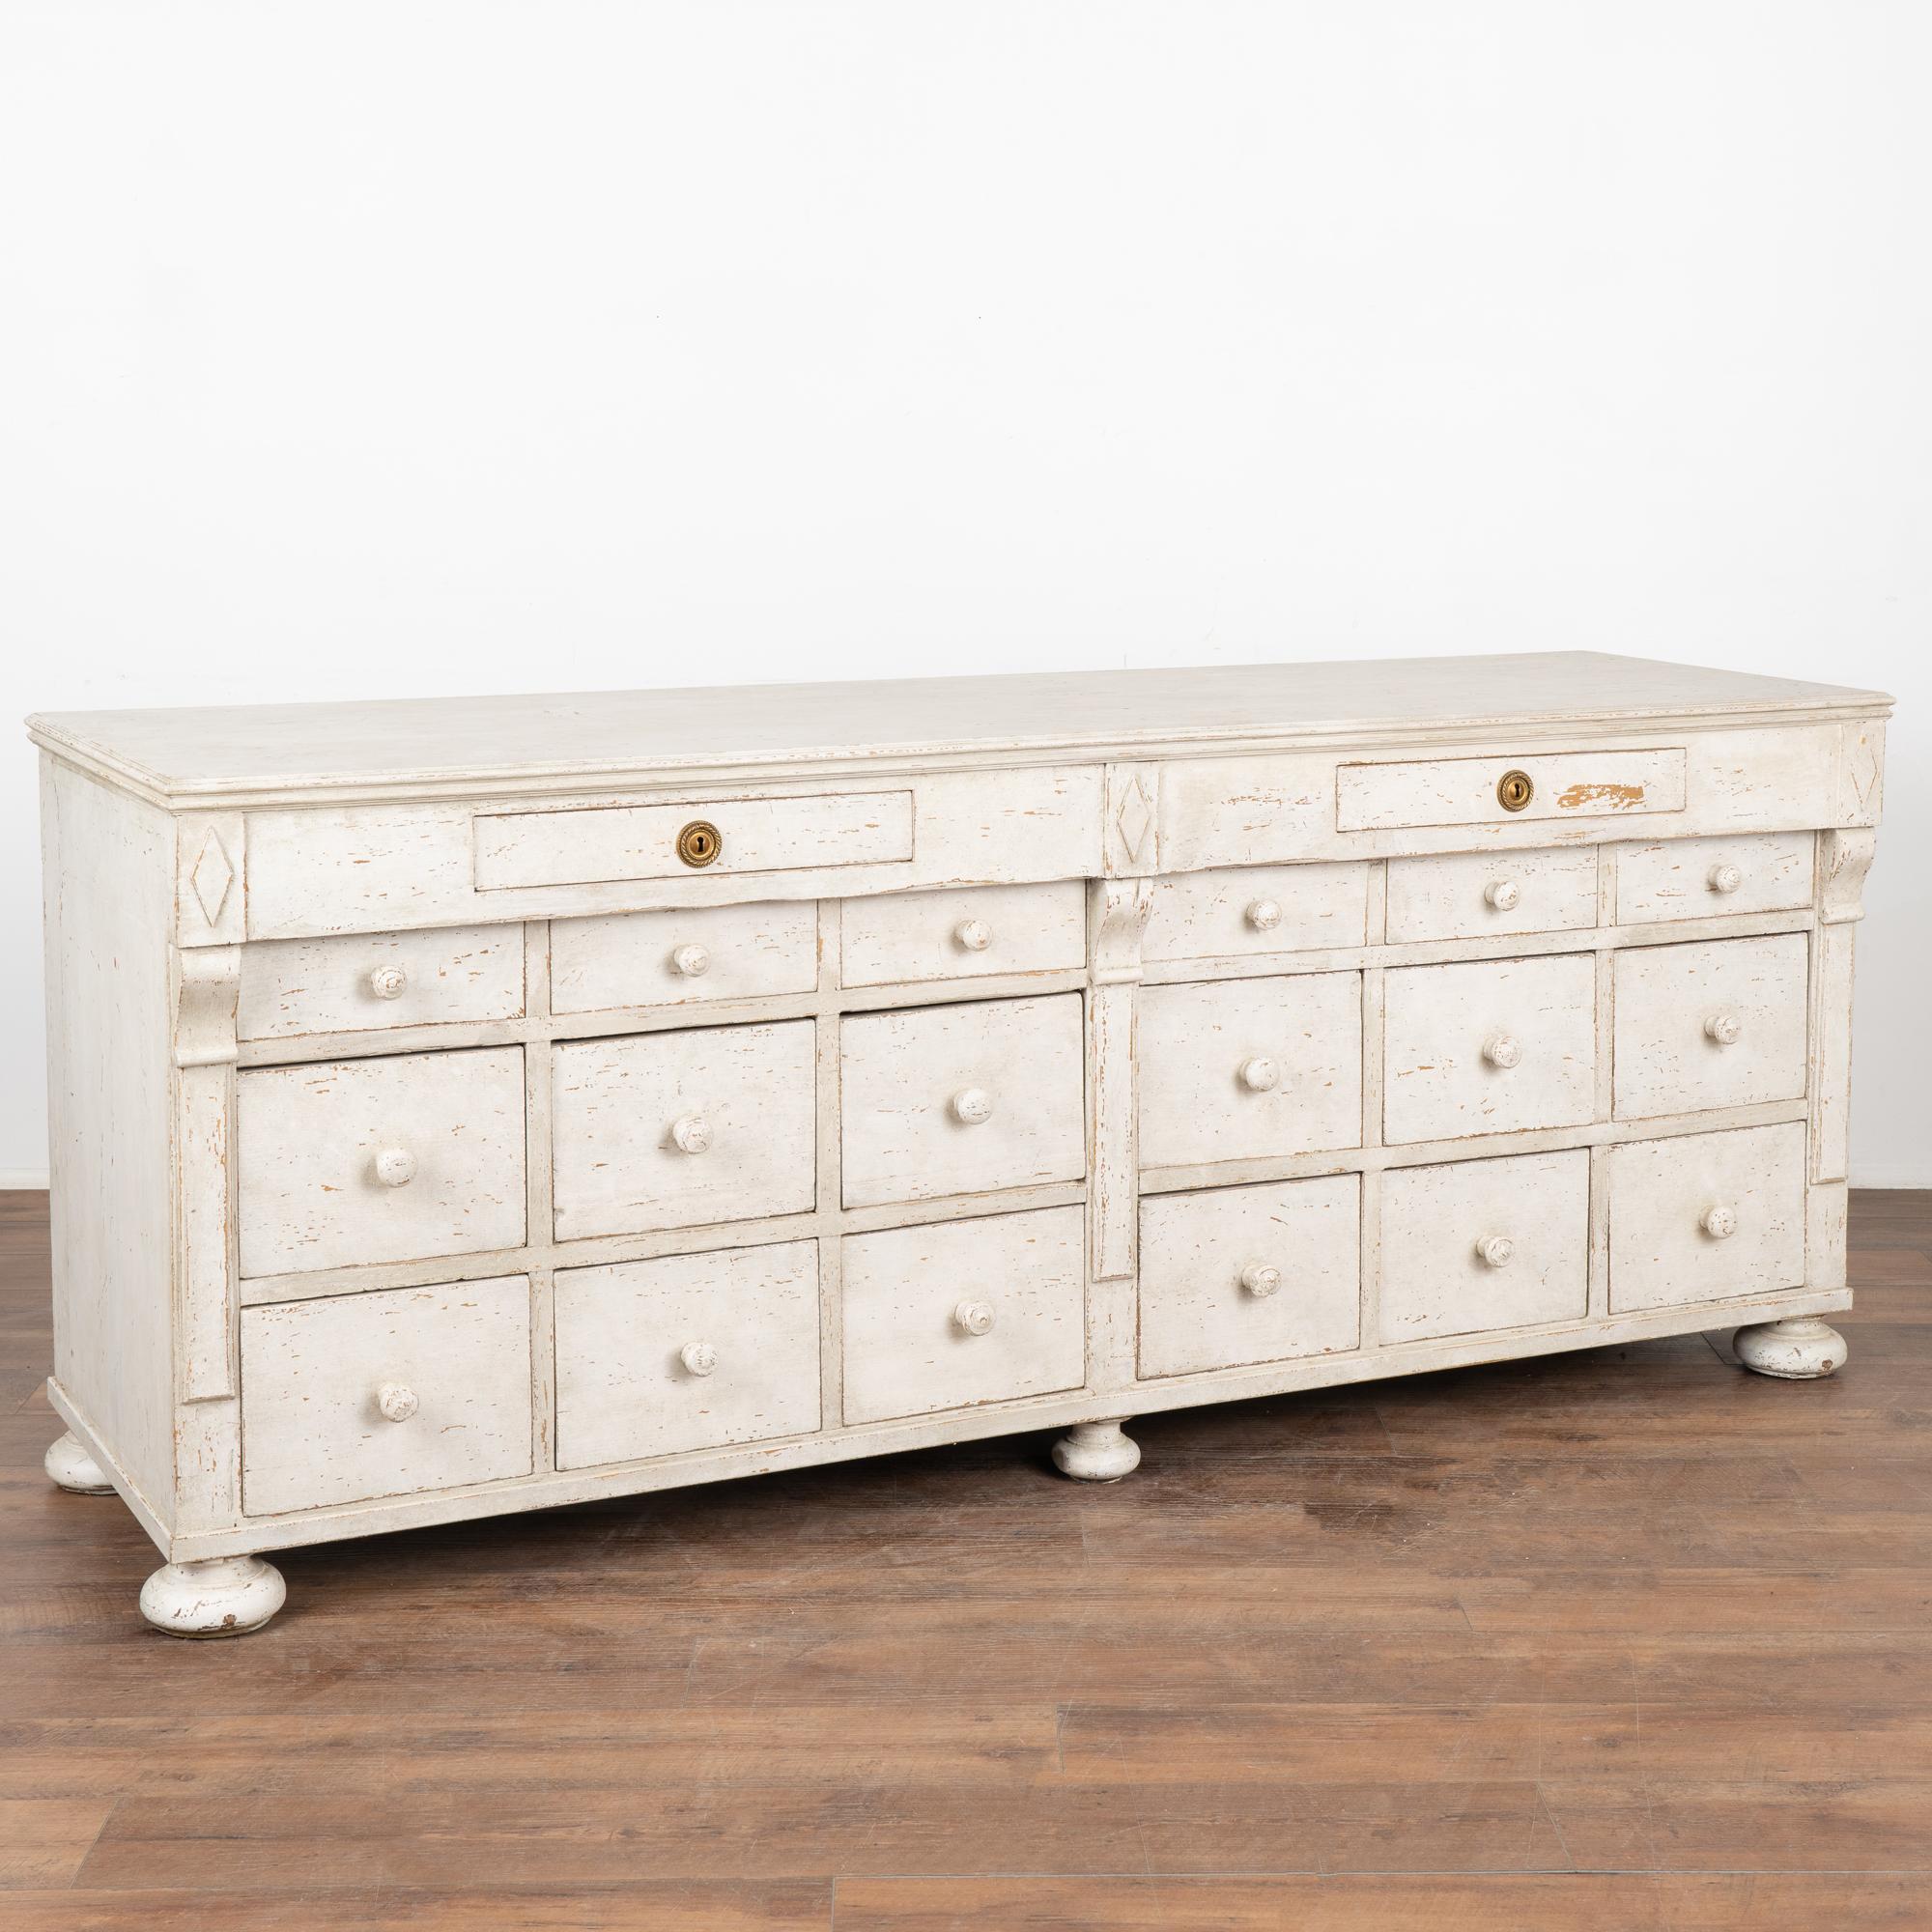 As a free standing counter resting on large bun feet, it will serve well as a modern kitchen island.
This sideboard has been given a professionally applied antique white painted layered finish, lightly distressed to fit the age of the counter